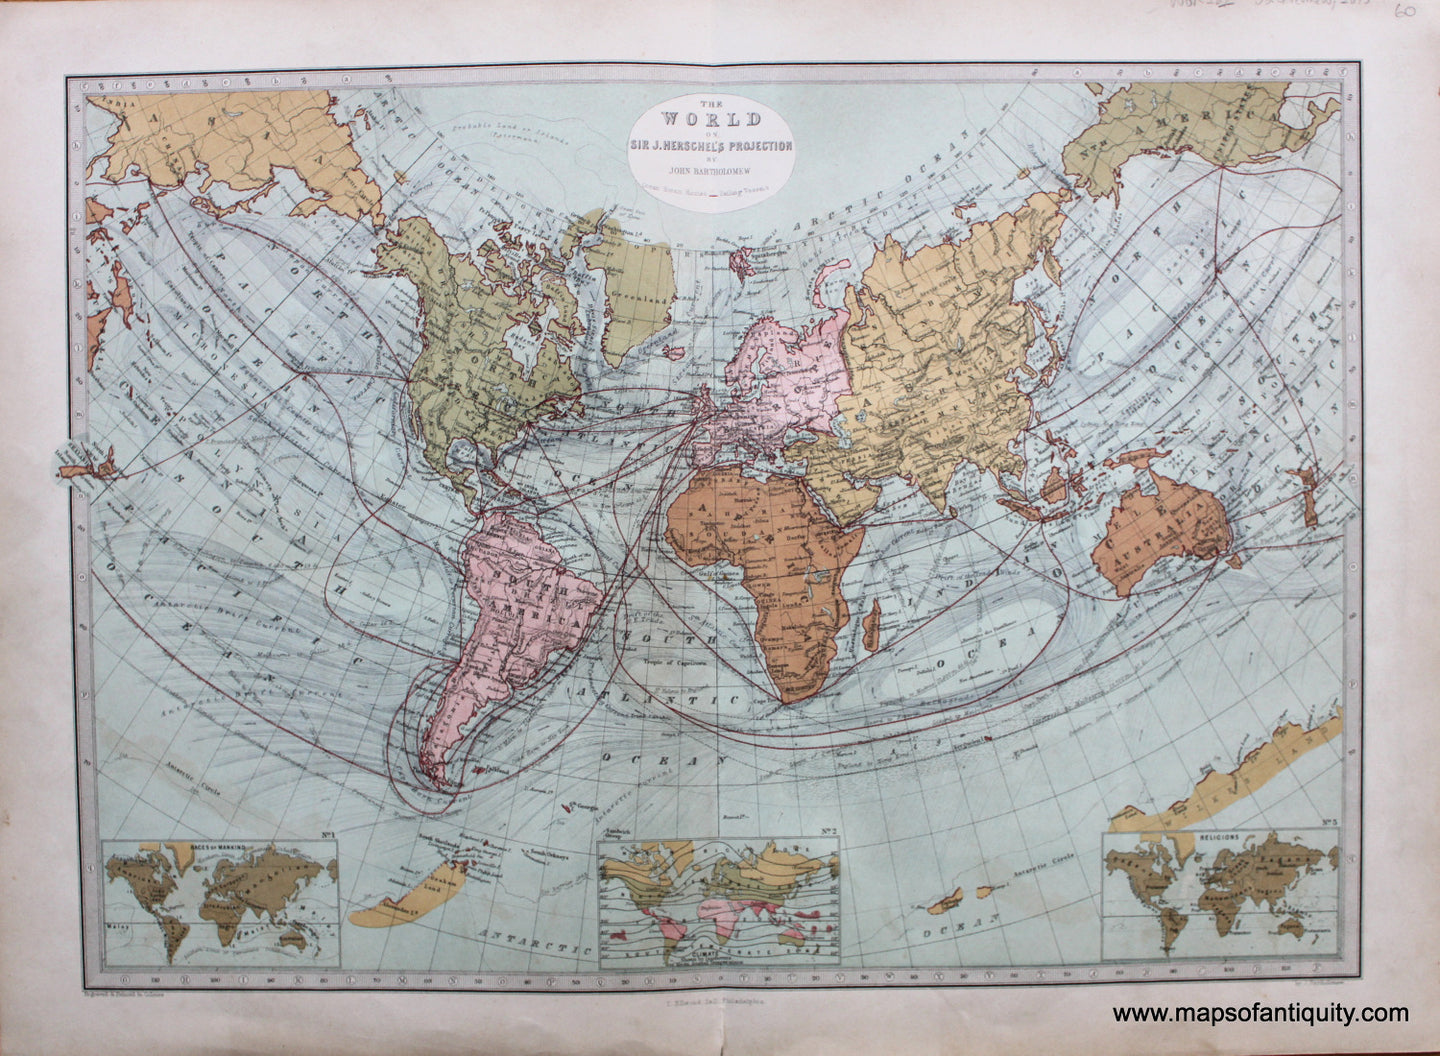 Antique-Printed-Color-Map-The-World-on-Sir-J.-Herschel's-Projection-**********-World--1873-J.-Bartholomew-Maps-Of-Antiquity